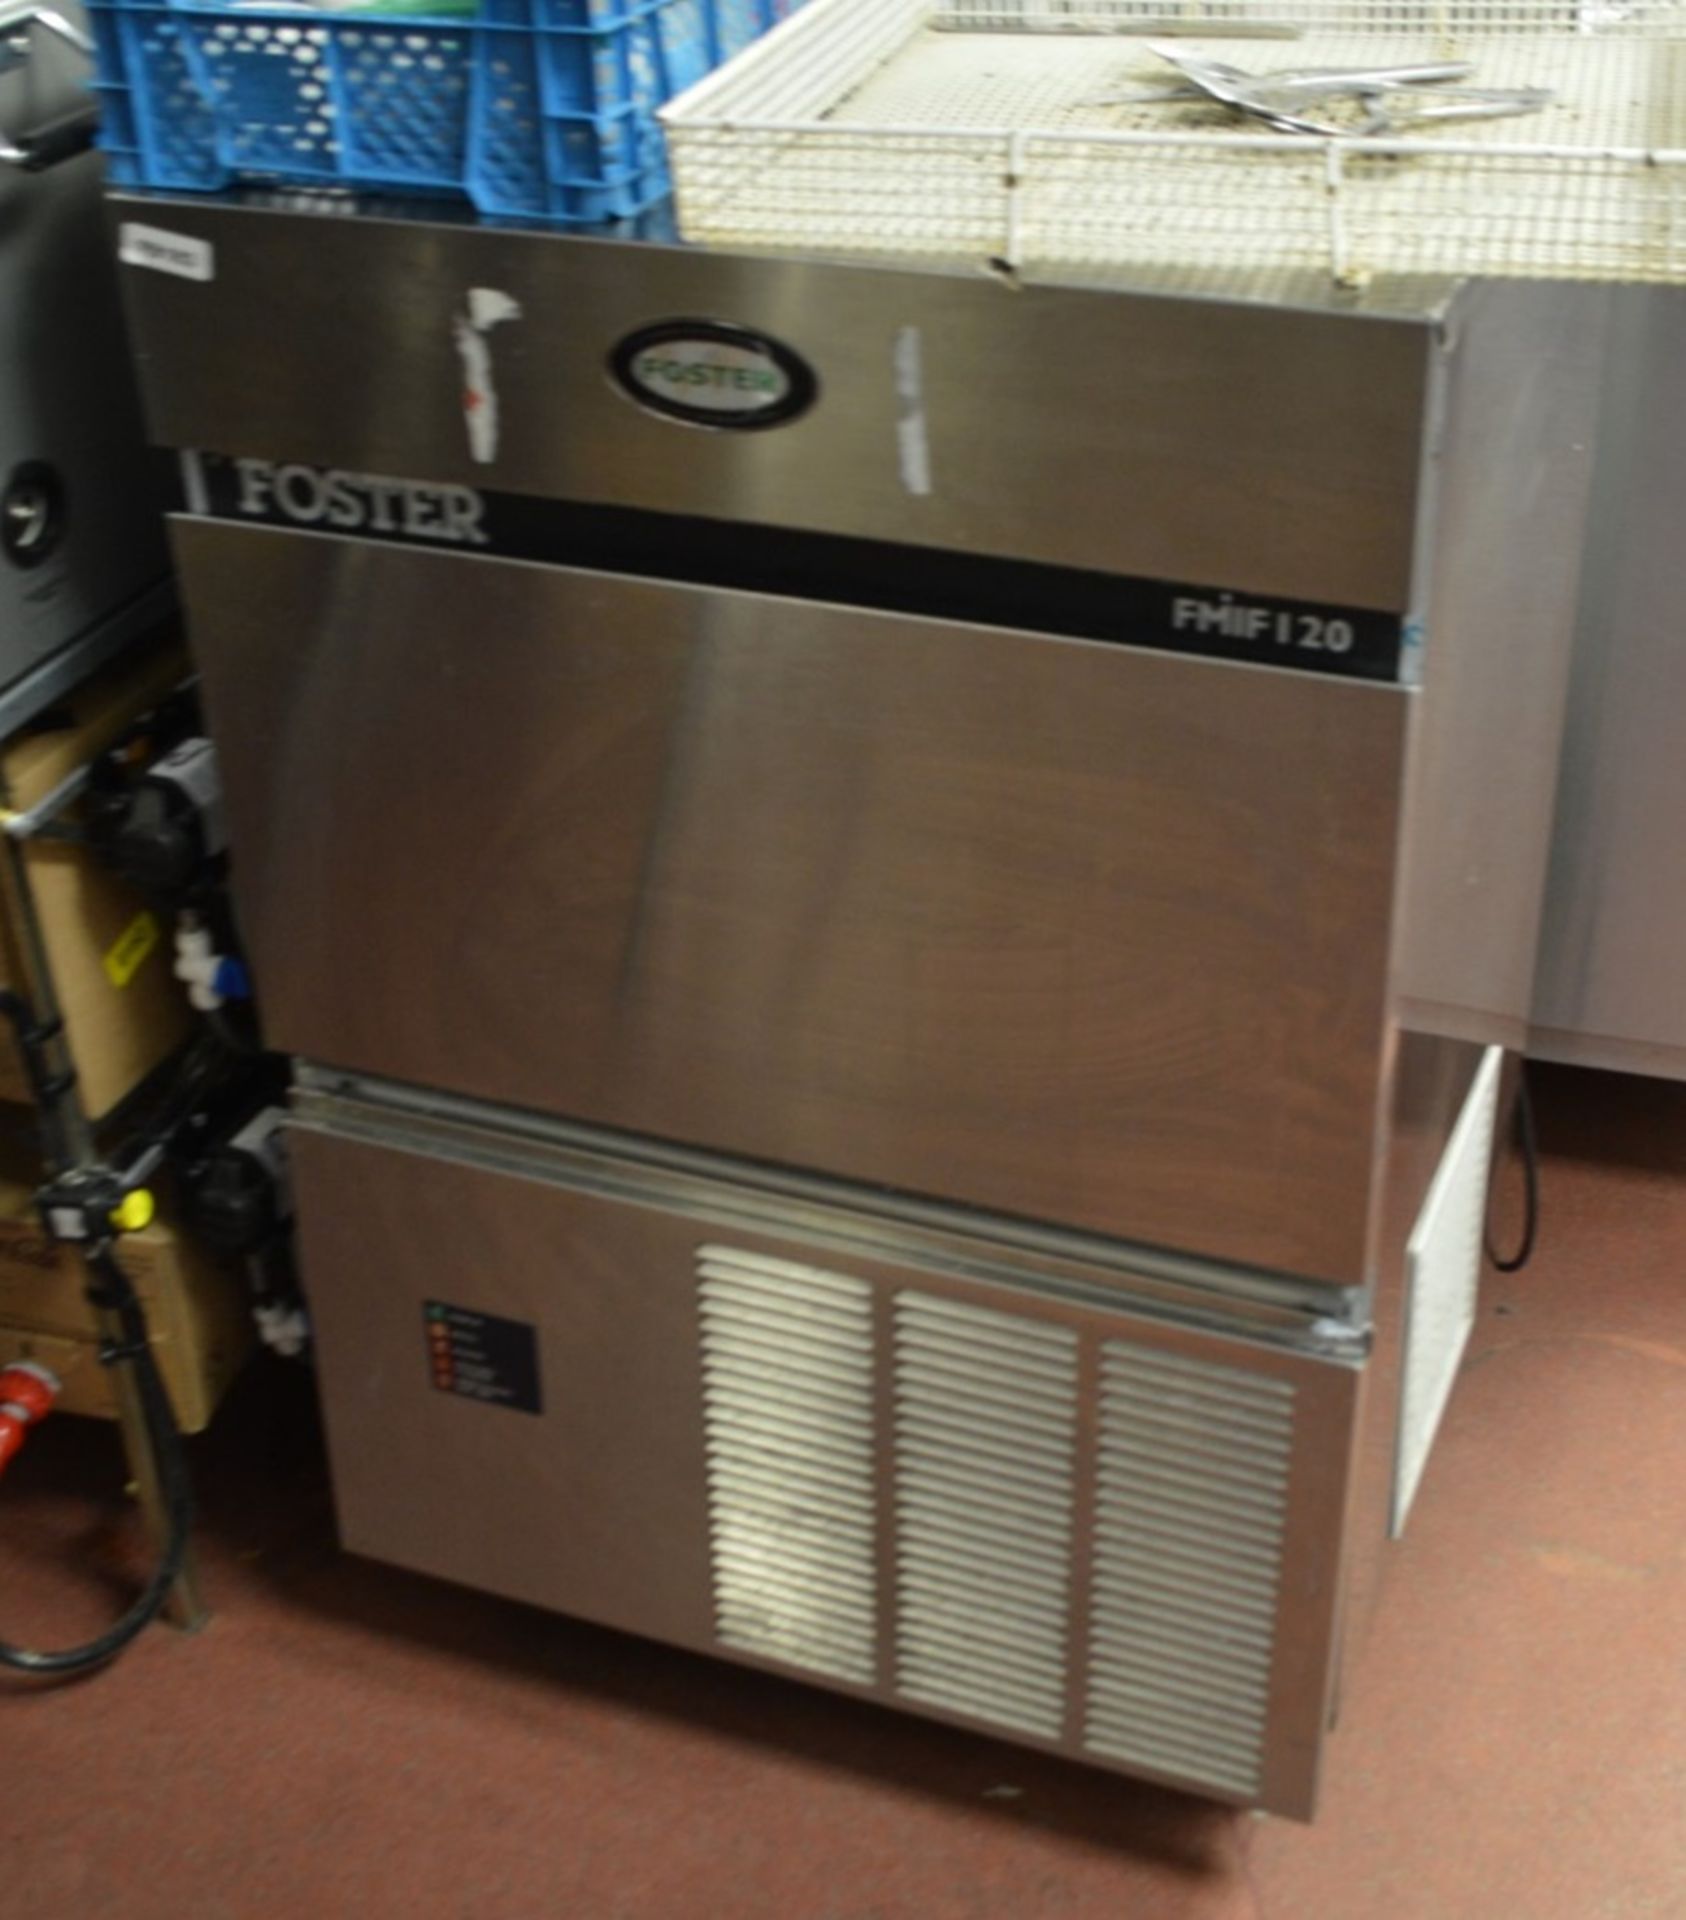 1 x Foster FMIF120 130kg Output Ice Flaker With Stand - H120 x W70 x D50 cms - RRP £3,900 - Ref - Bild 3 aus 5